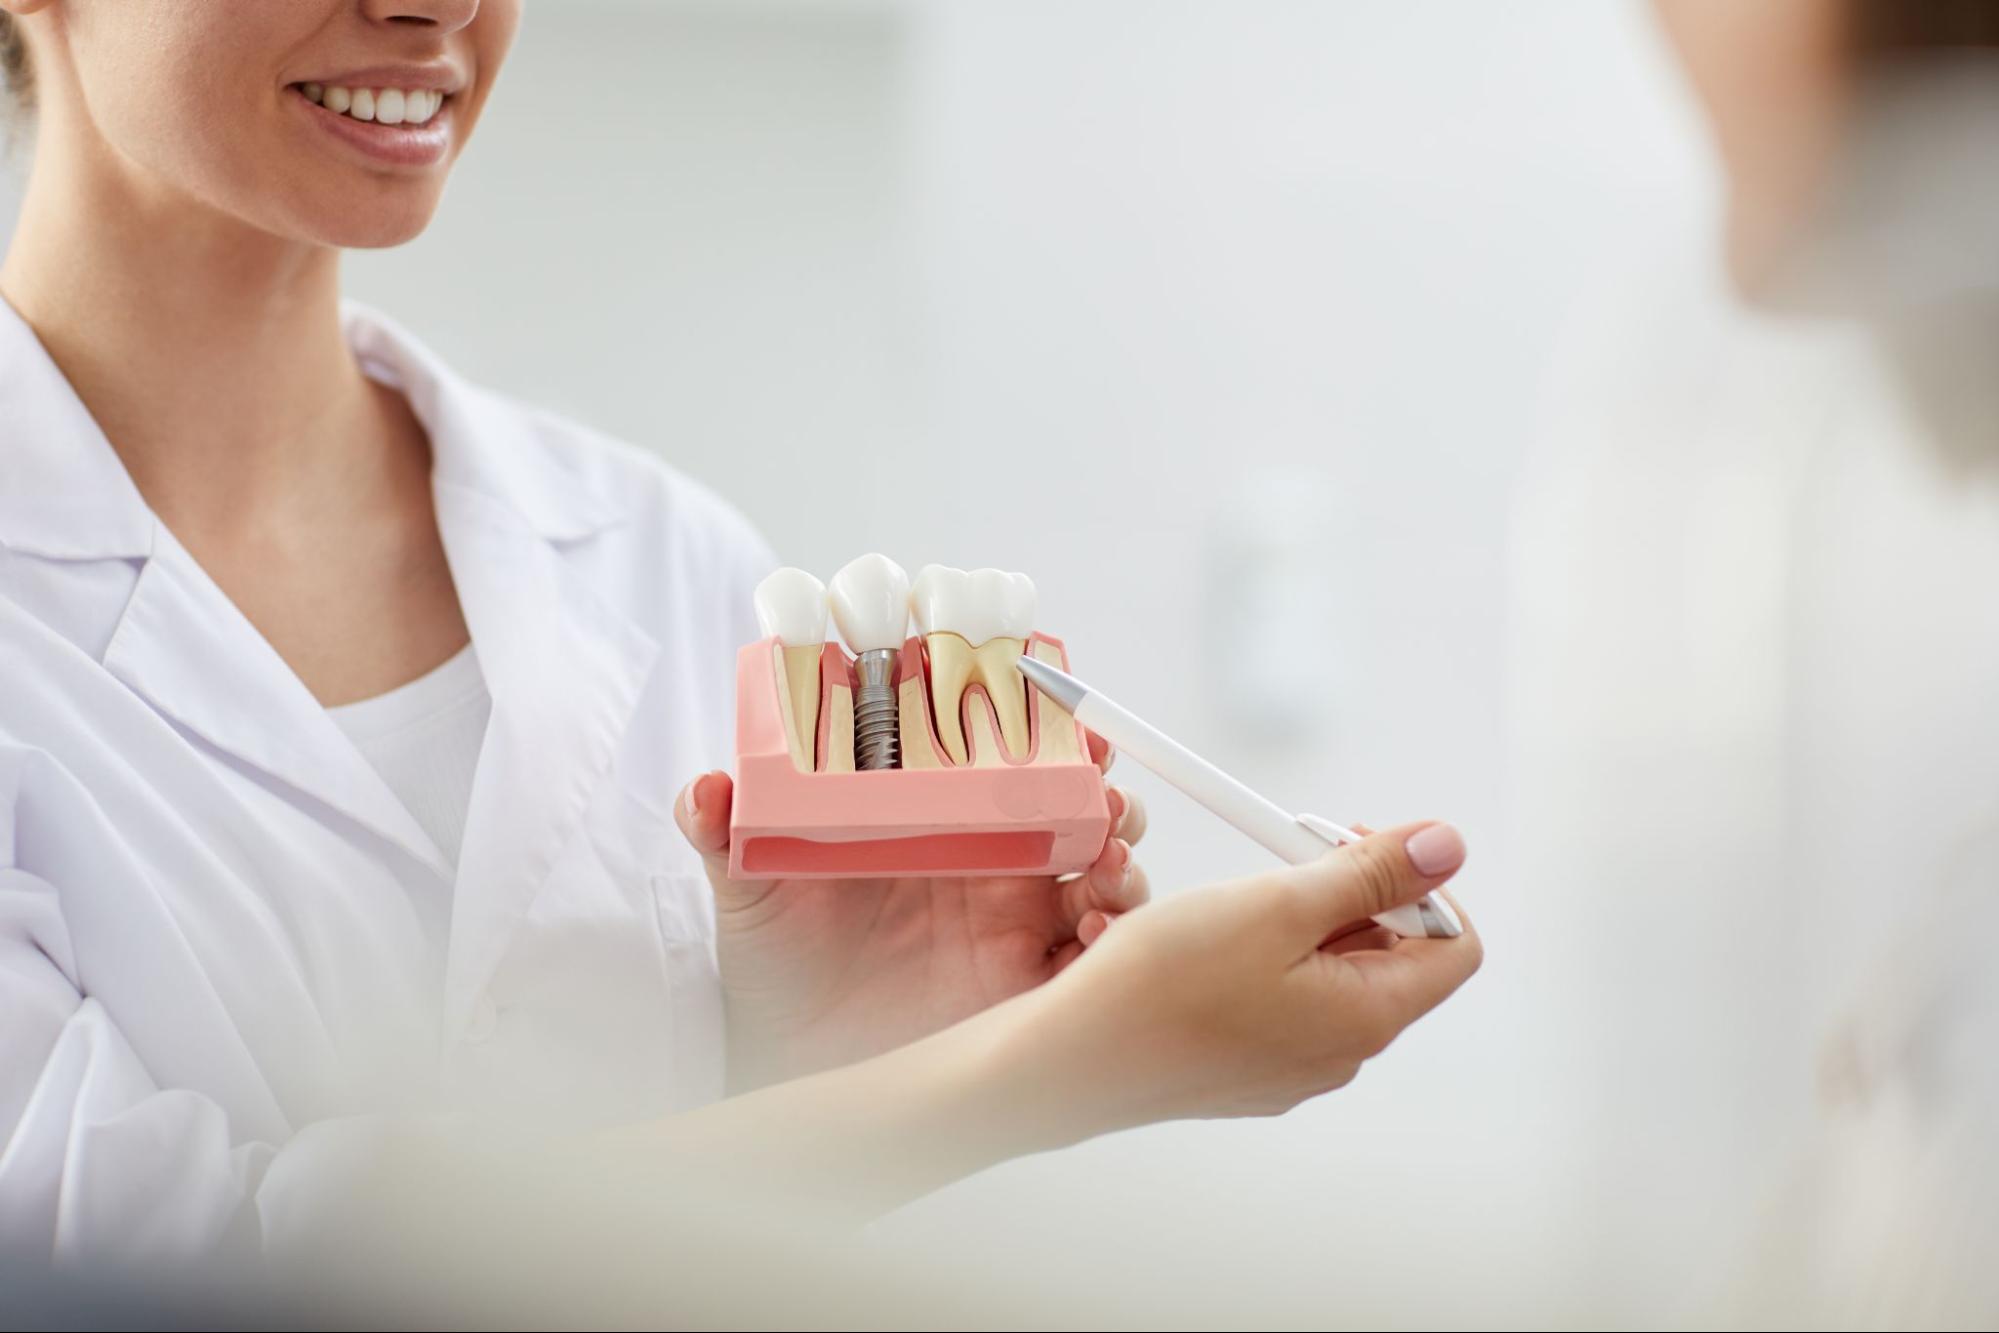 dentist showing patient example of dental implant model